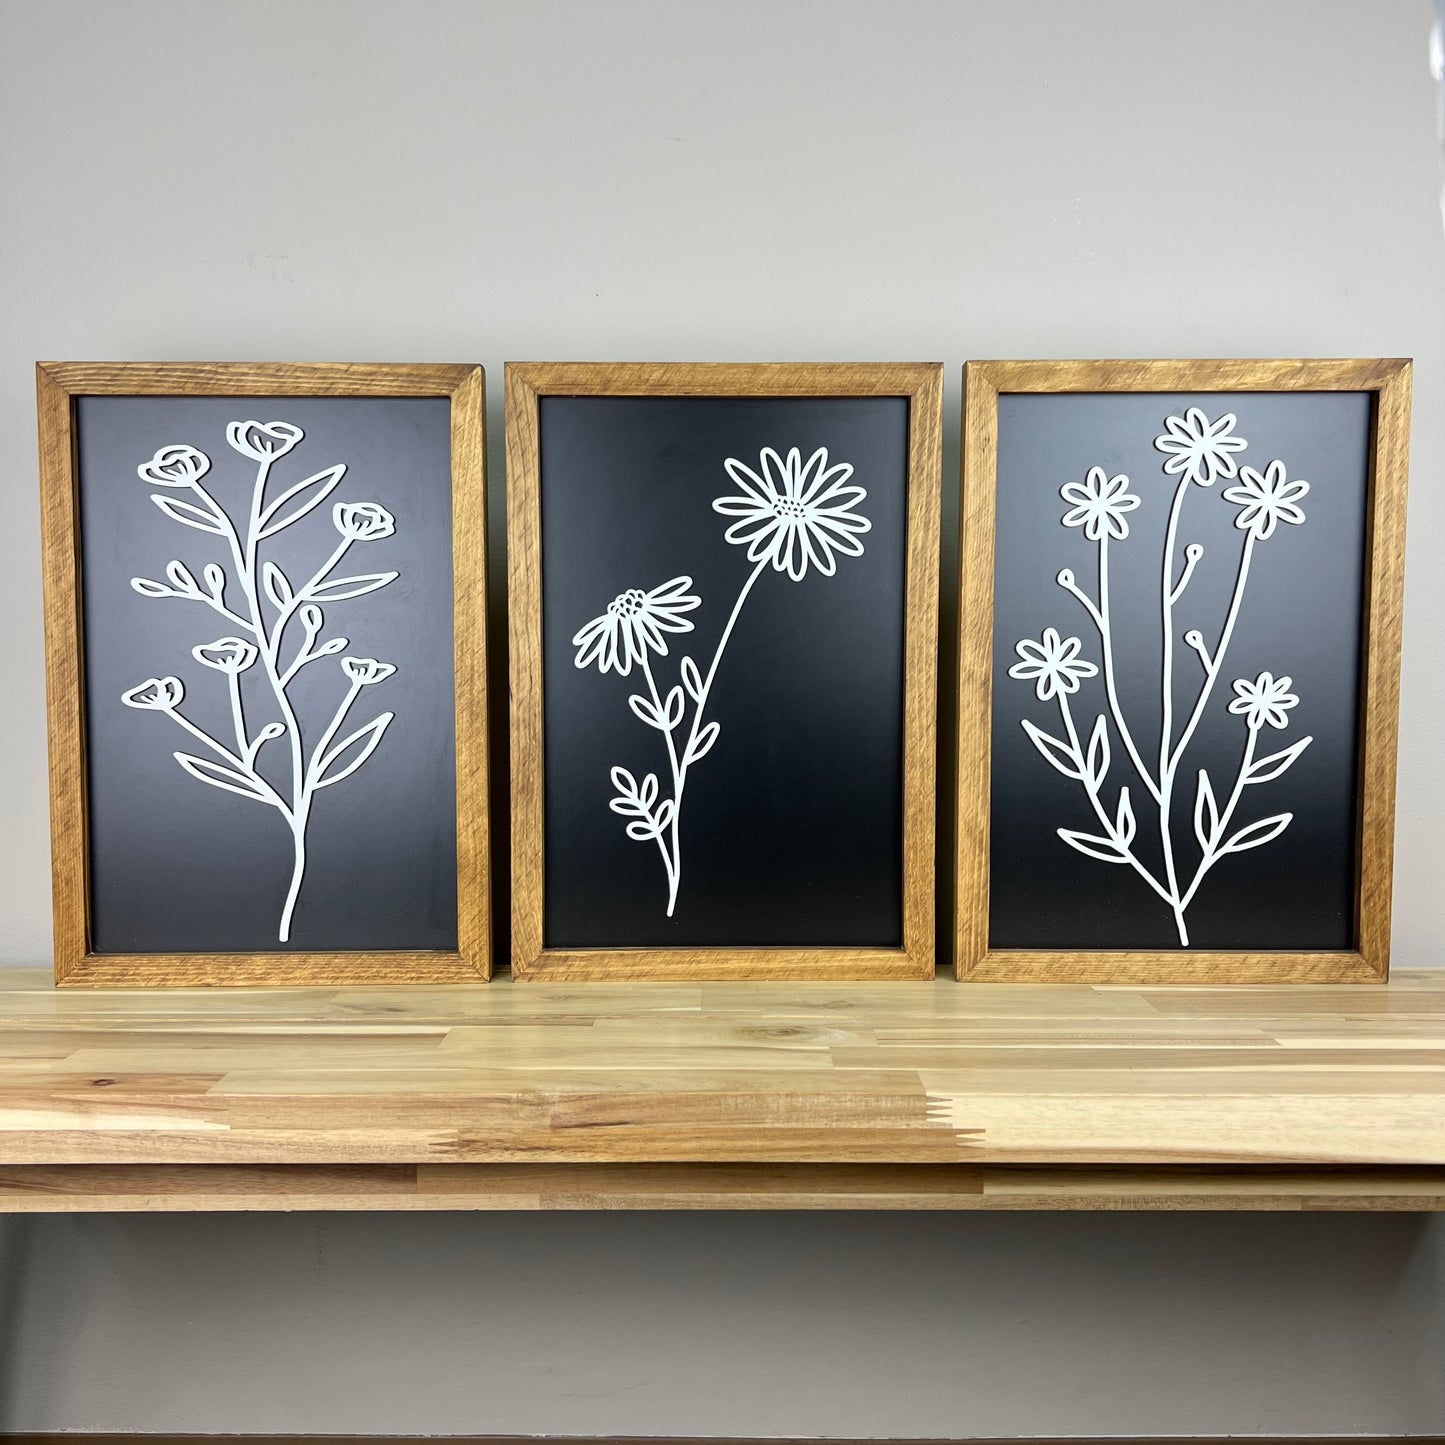 Set of 3 Floral Black Wood Signs | 11x16 inch Sign Set | Black with White Flowers